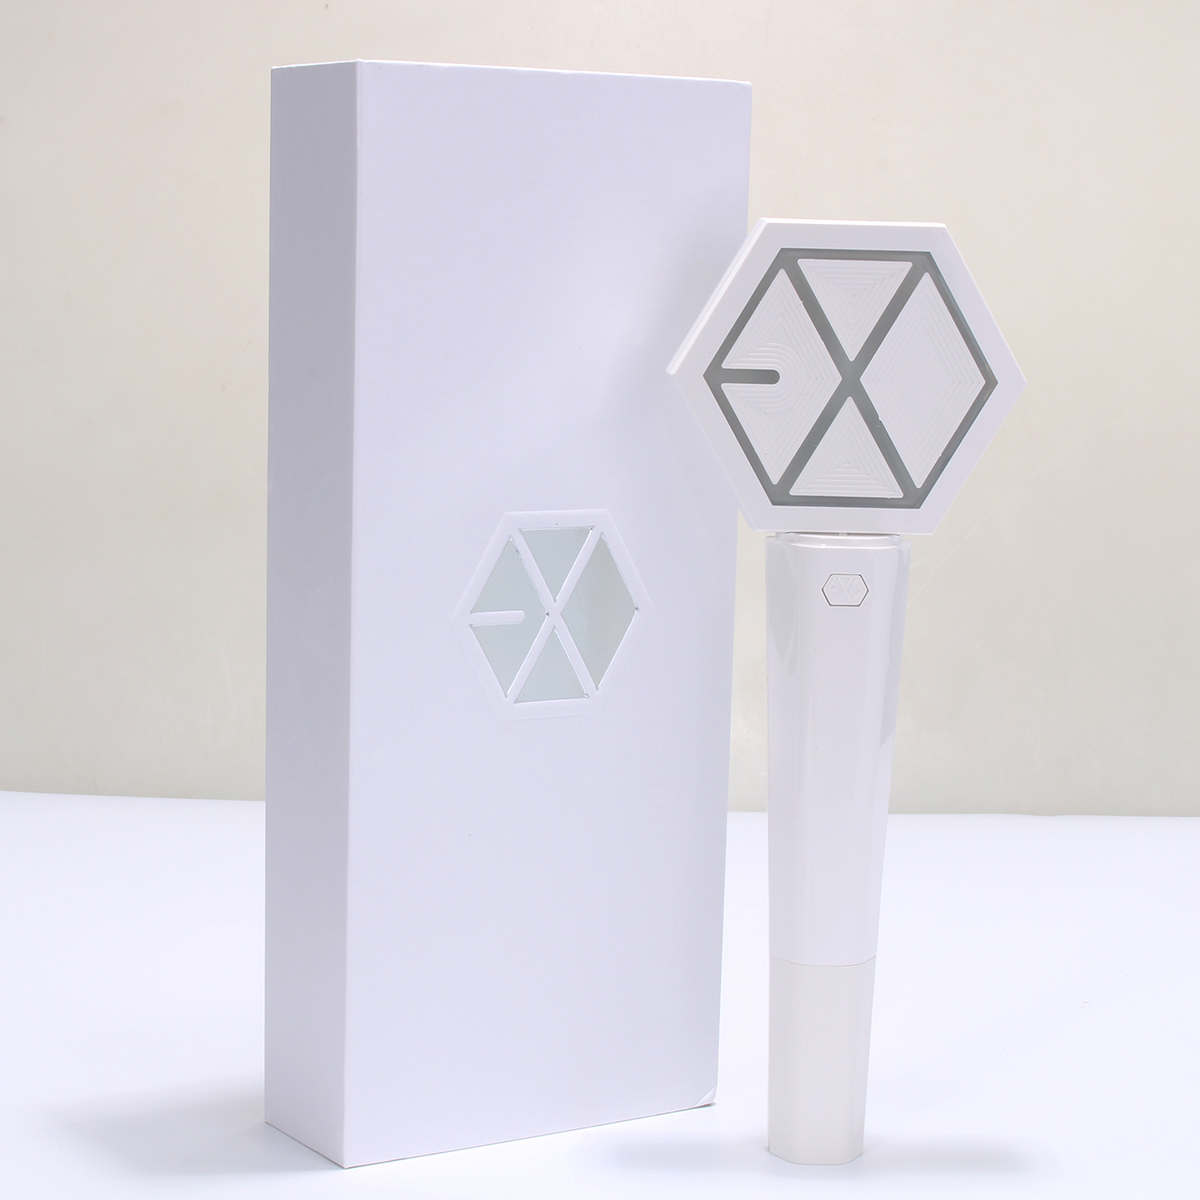 

Concert Ver 2.0 Lamp Glow Lightstick Gifts Decorations For KPOP EXO Chanyeol D.O Sehun